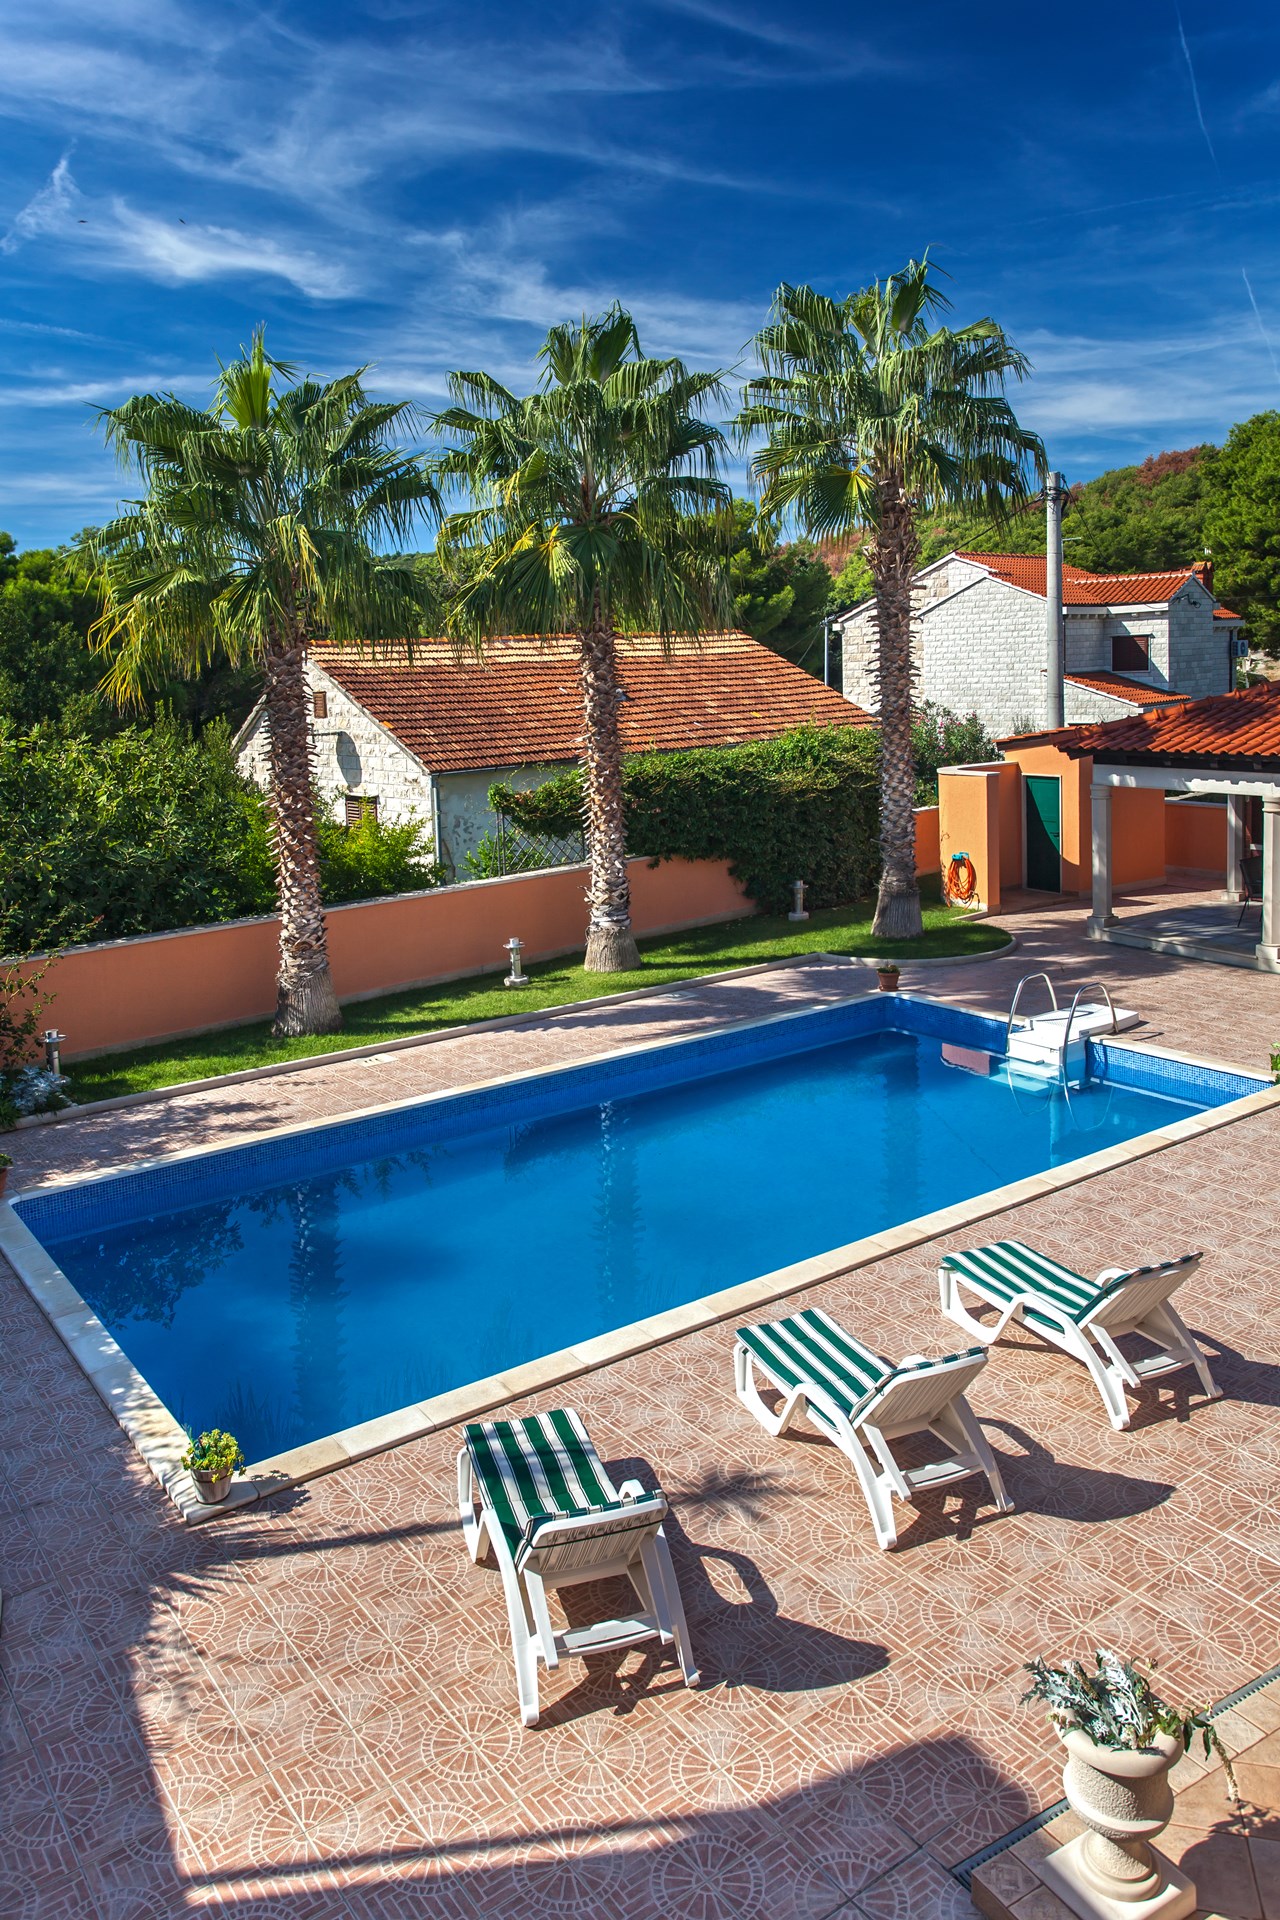 Swimming pool with sunbeds and relaxing area on the front terrace the Villa Rasotica